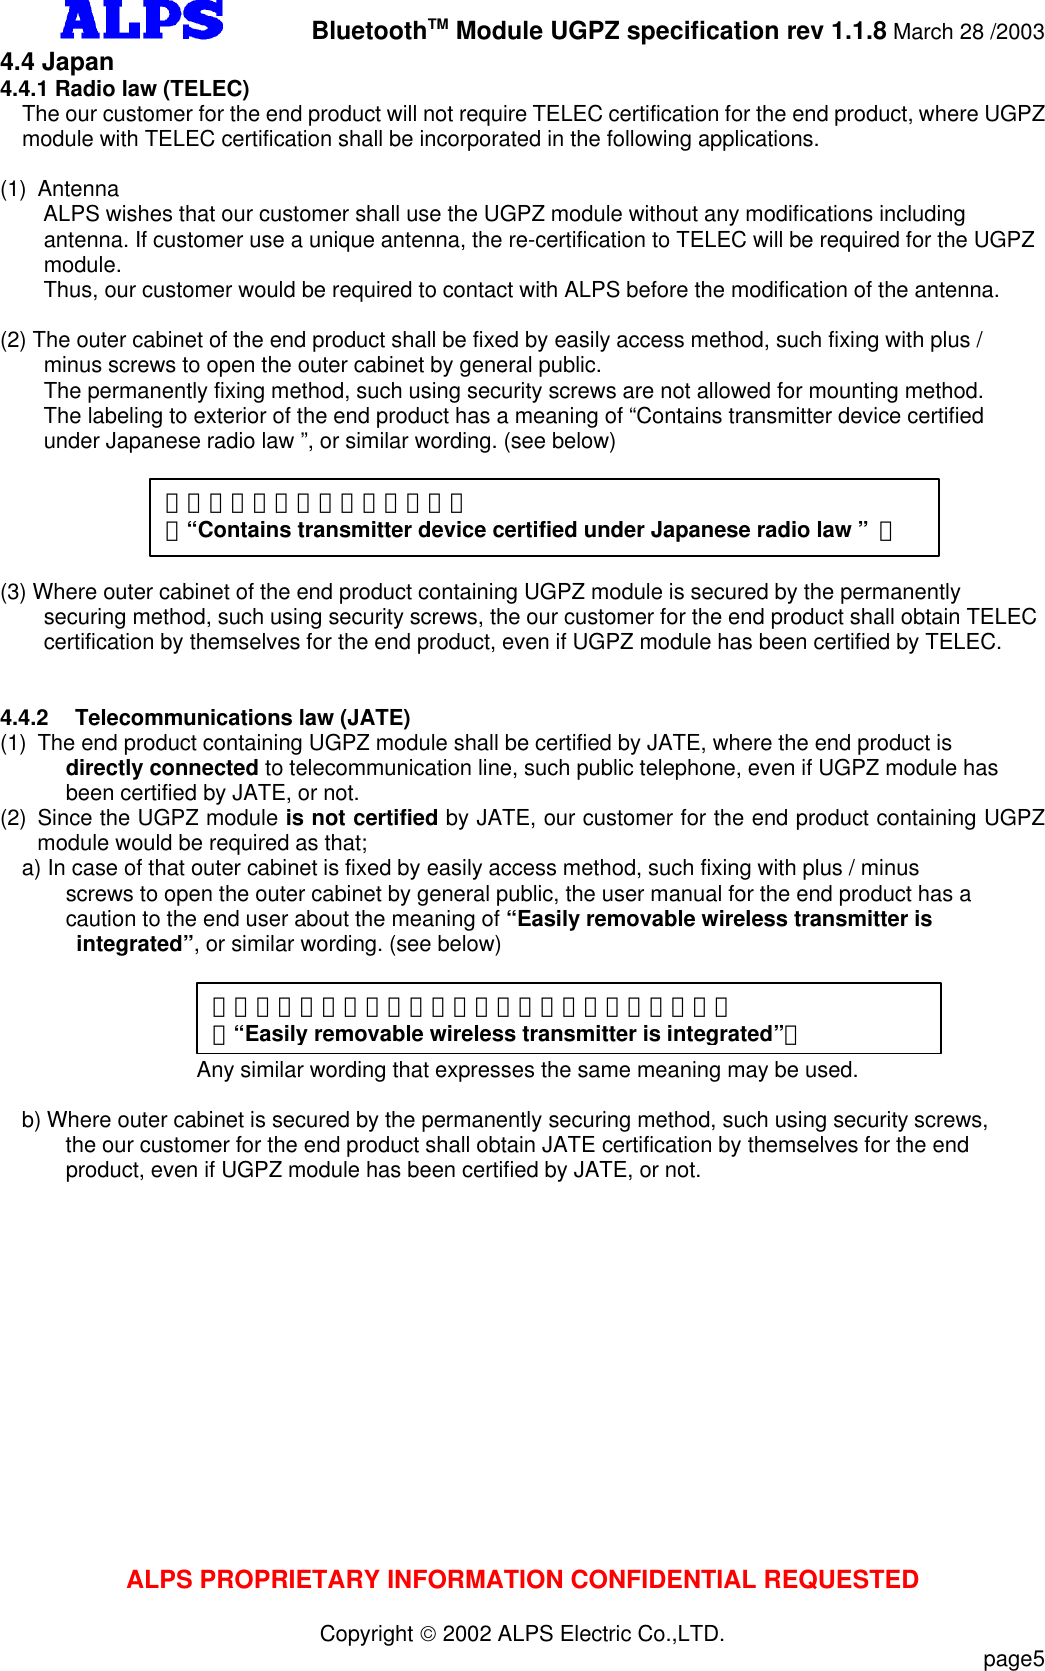         BluetoothTM Module UGPZ specification rev 1.1.8 March 28 /2003ALPS PROPRIETARY INFORMATION CONFIDENTIAL REQUESTEDCopyright  2002 ALPS Electric Co.,LTD.                           page54.4 Japan4.4.1 Radio law (TELEC)The our customer for the end product will not require TELEC certification for the end product, where UGPZmodule with TELEC certification shall be incorporated in the following applications.(1) Antenna    ALPS wishes that our customer shall use the UGPZ module without any modifications includingantenna. If customer use a unique antenna, the re-certification to TELEC will be required for the UGPZmodule.    Thus, our customer would be required to contact with ALPS before the modification of the antenna.(2) The outer cabinet of the end product shall be fixed by easily access method, such fixing with plus /minus screws to open the outer cabinet by general public.The permanently fixing method, such using security screws are not allowed for mounting method.   The labeling to exterior of the end product has a meaning of “Contains transmitter device certifiedunder Japanese radio law ”, or similar wording. (see below)(3) Where outer cabinet of the end product containing UGPZ module is secured by the permanentlysecuring method, such using security screws, the our customer for the end product shall obtain TELECcertification by themselves for the end product, even if UGPZ module has been certified by TELEC. 4.4.2 Telecommunications law (JATE)(1) The end product containing UGPZ module shall be certified by JATE, where the end product isdirectly connected to telecommunication line, such public telephone, even if UGPZ module hasbeen certified by JATE, or not.(2) Since the UGPZ module is not certified by JATE, our customer for the end product containing UGPZmodule would be required as that;a) In case of that outer cabinet is fixed by easily access method, such fixing with plus / minusscrews to open the outer cabinet by general public, the user manual for the end product has acaution to the end user about the meaning of “Easily removable wireless transmitter is integrated”, or similar wording. (see below)                  Any similar wording that expresses the same meaning may be used.  b) Where outer cabinet is secured by the permanently securing method, such using security screws,the our customer for the end product shall obtain JATE certification by themselves for the endproduct, even if UGPZ module has been certified by JATE, or not.「電波法適合無線設備を内蔵」（“Contains transmitter device certified under Japanese radio law ” ）「容易に取り外せる無線設備が内蔵されています。」（“Easily removable wireless transmitter is integrated”）